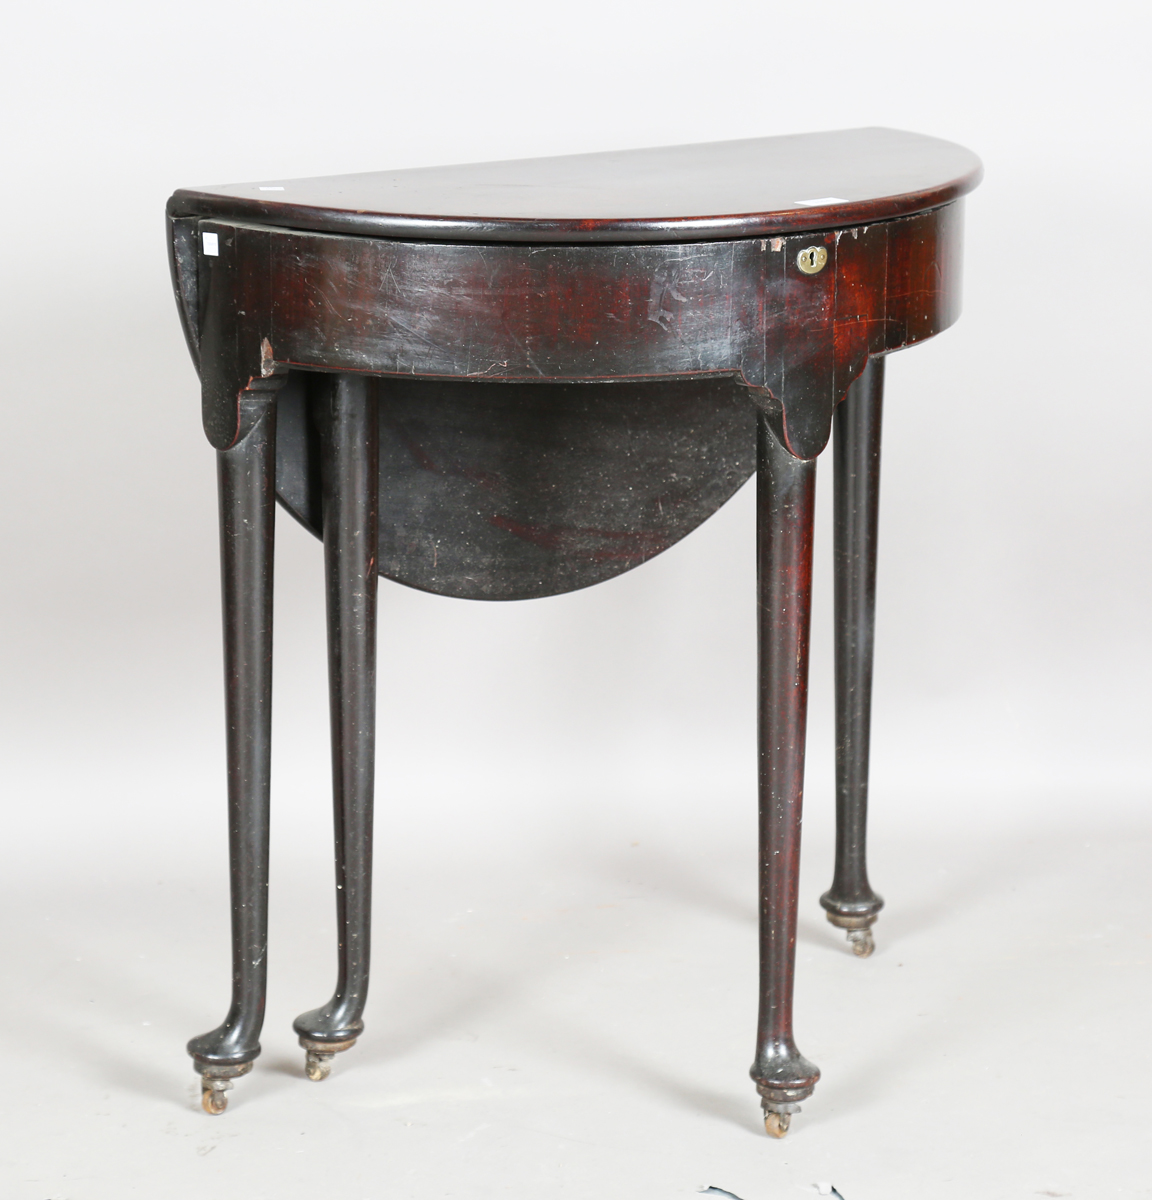 A George III mahogany demi-lune drop-flap table with hinged lid, on straight tapering legs and pad